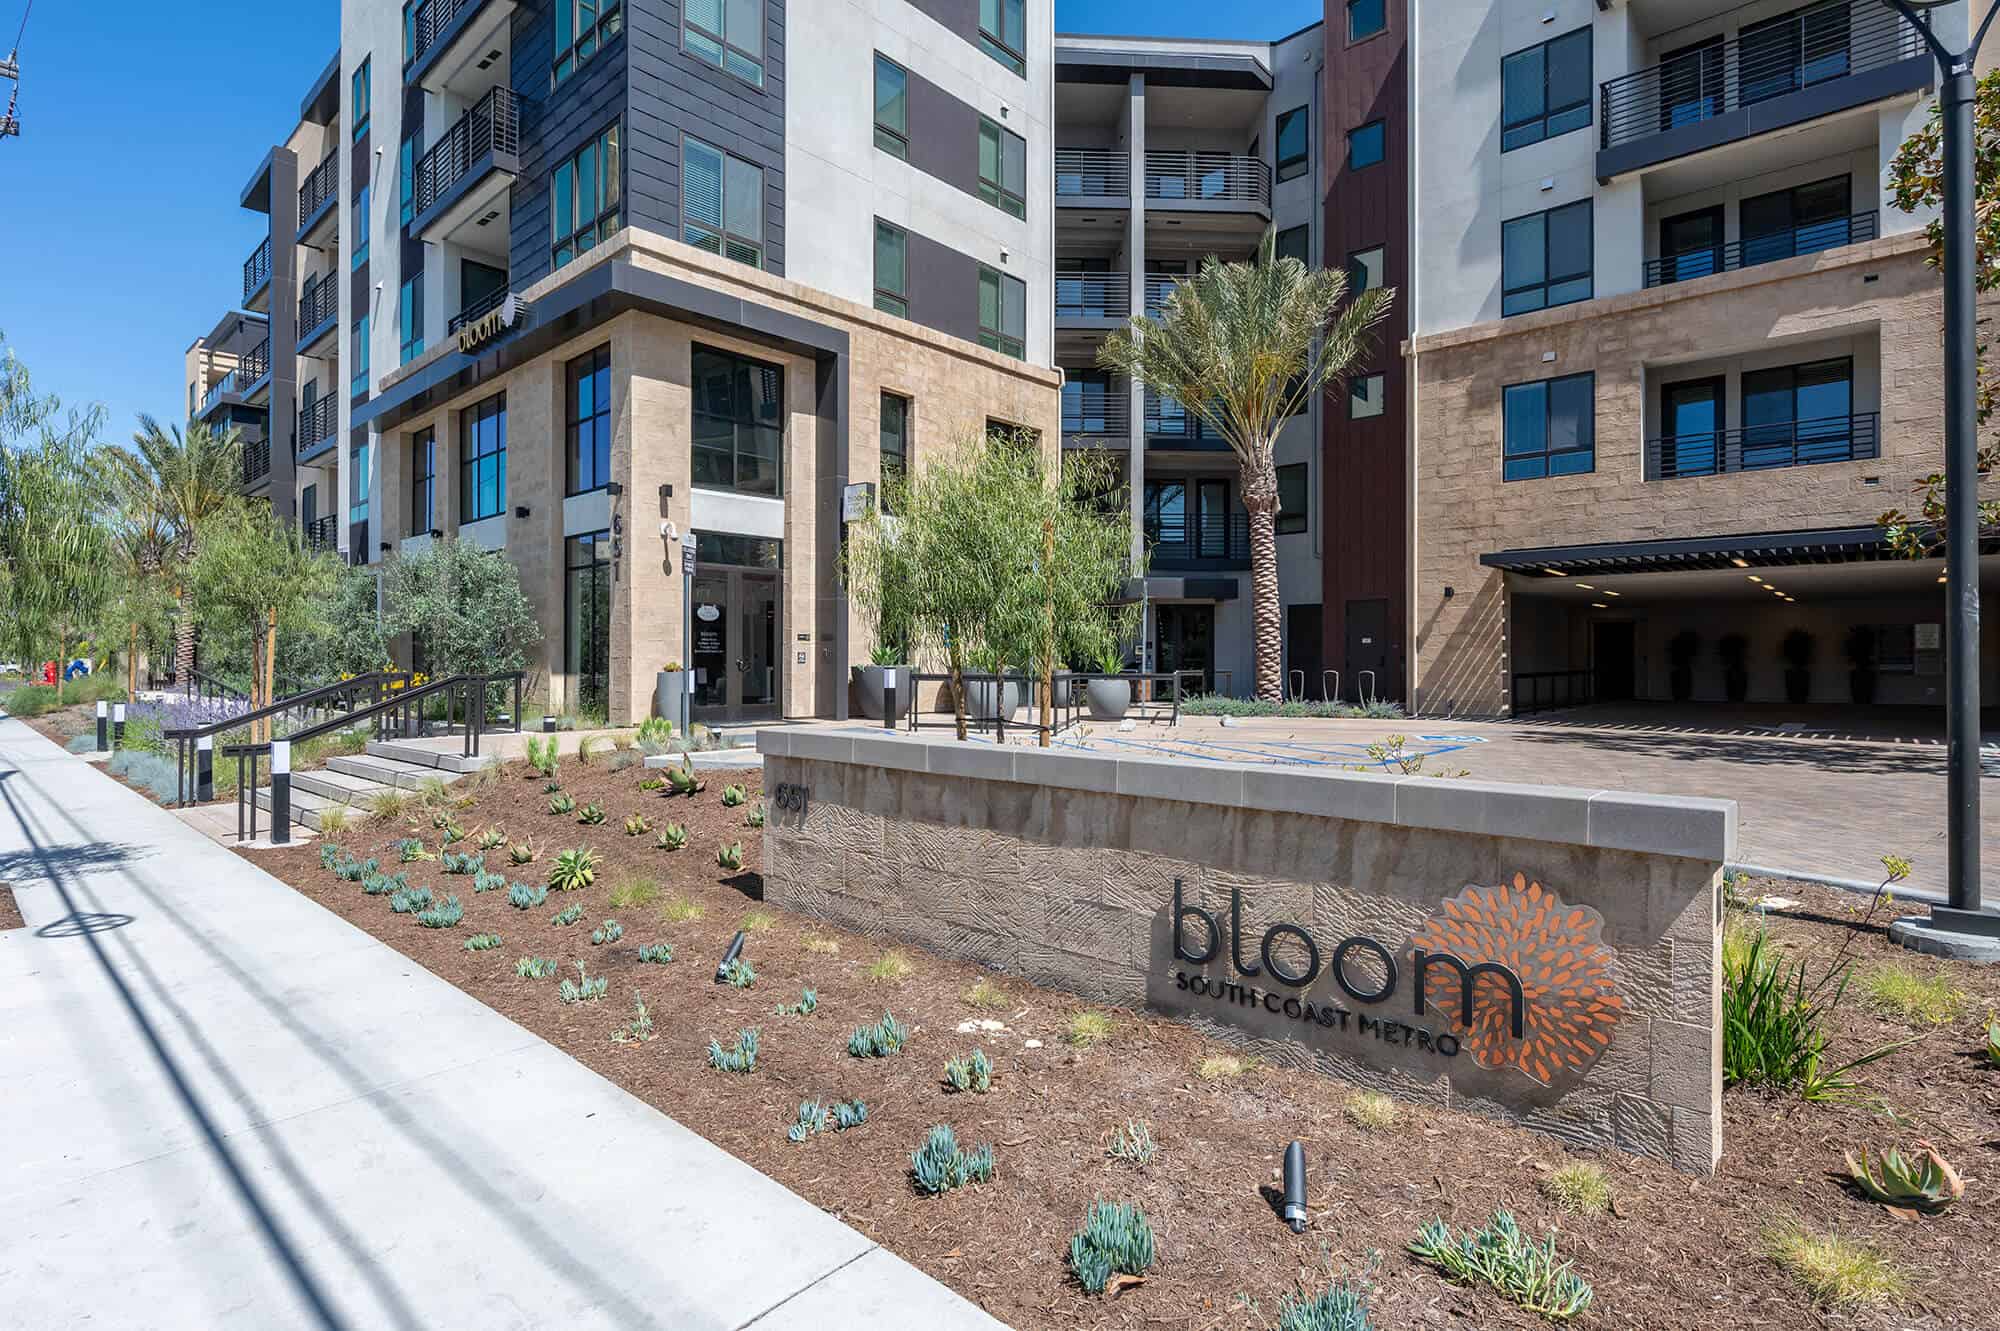 An exterior view of the apartment complex t with a visible sign for Bloom South Coast.